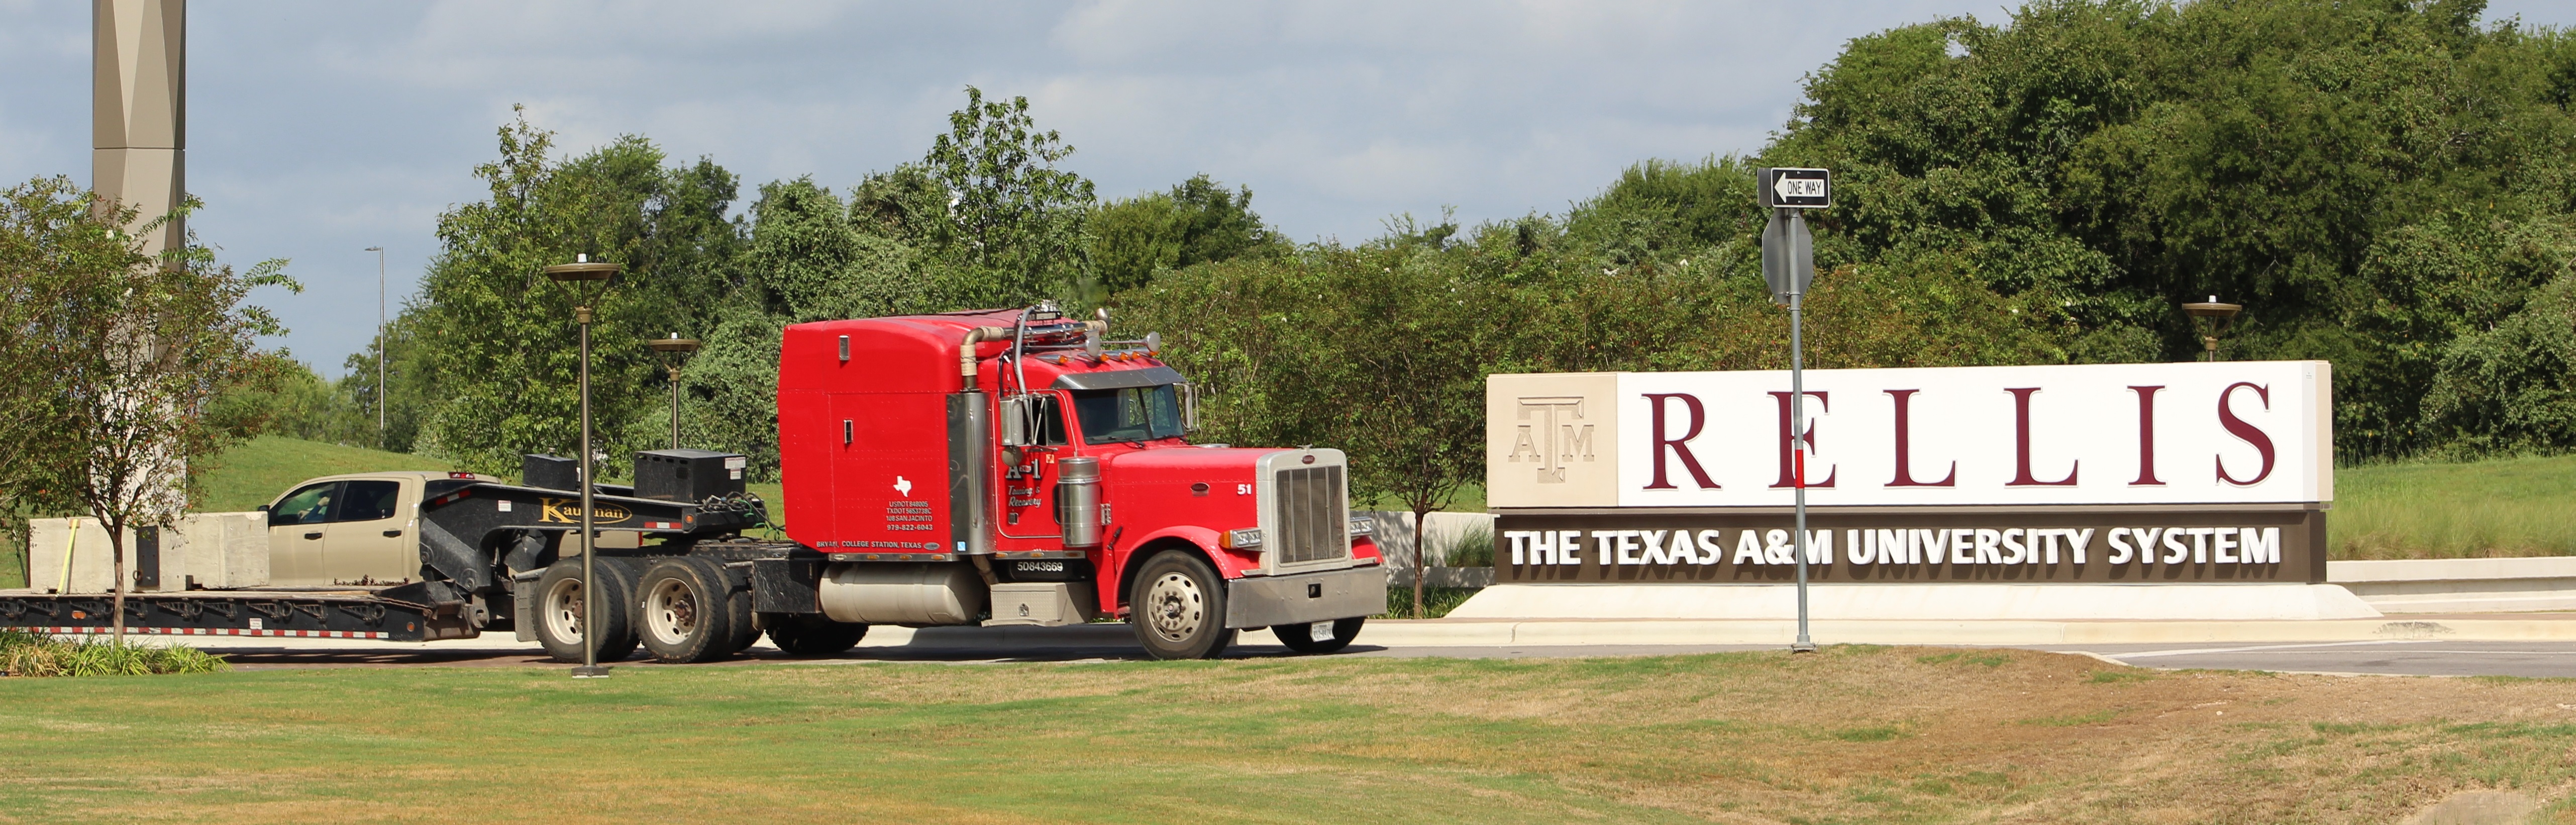 This is an image of a 18-wheeler truck at Rellis Texas A&M University.